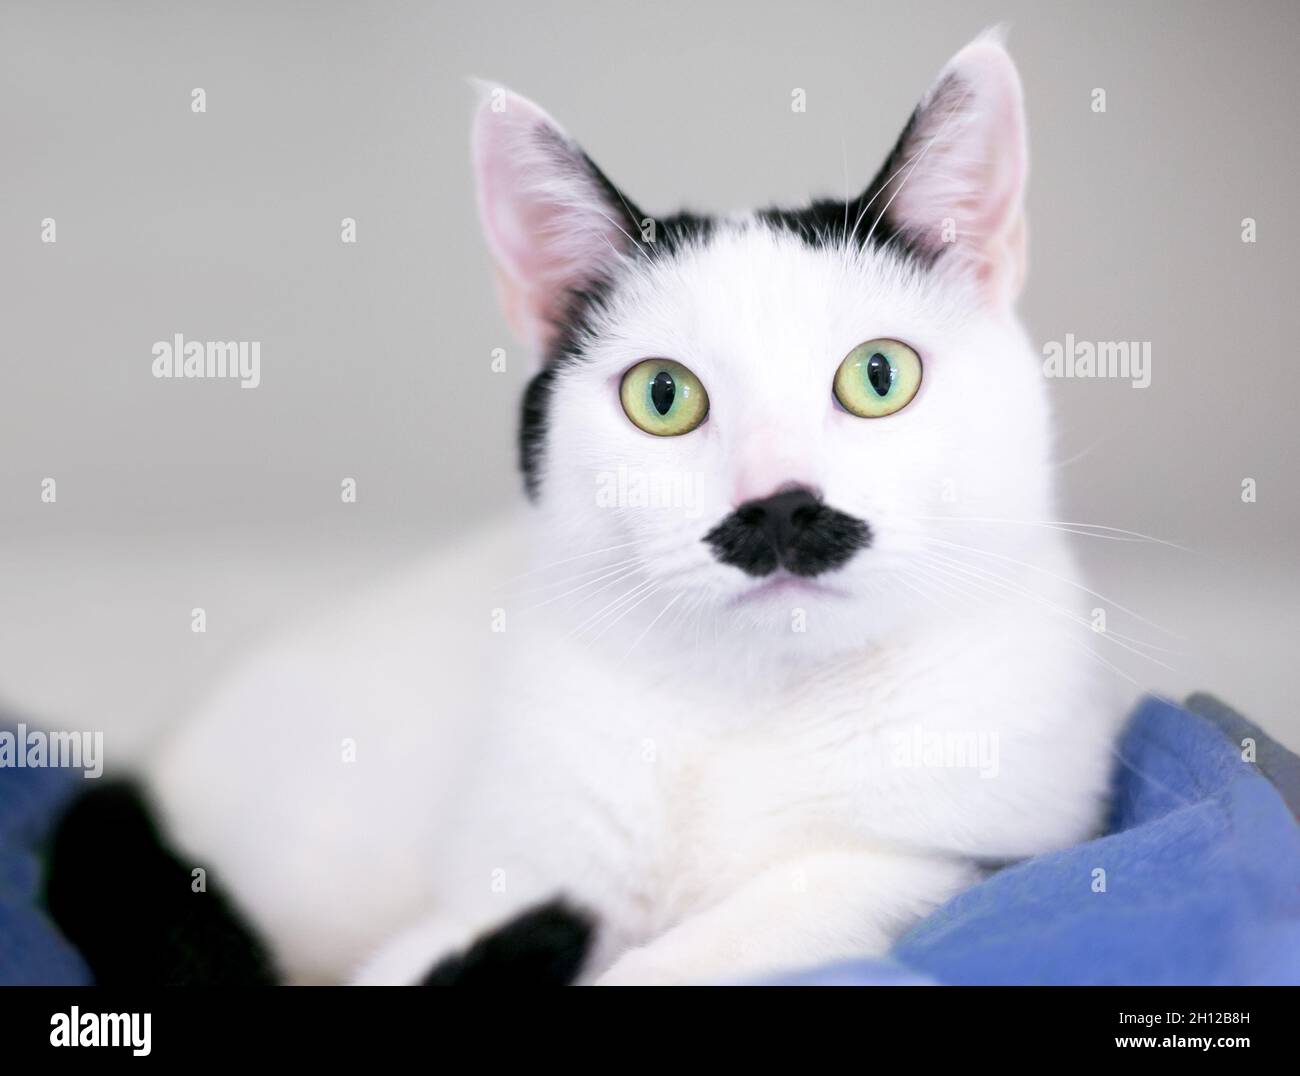 A black and white shorthair cat with markings on its face that look like a mustache Stock Photo